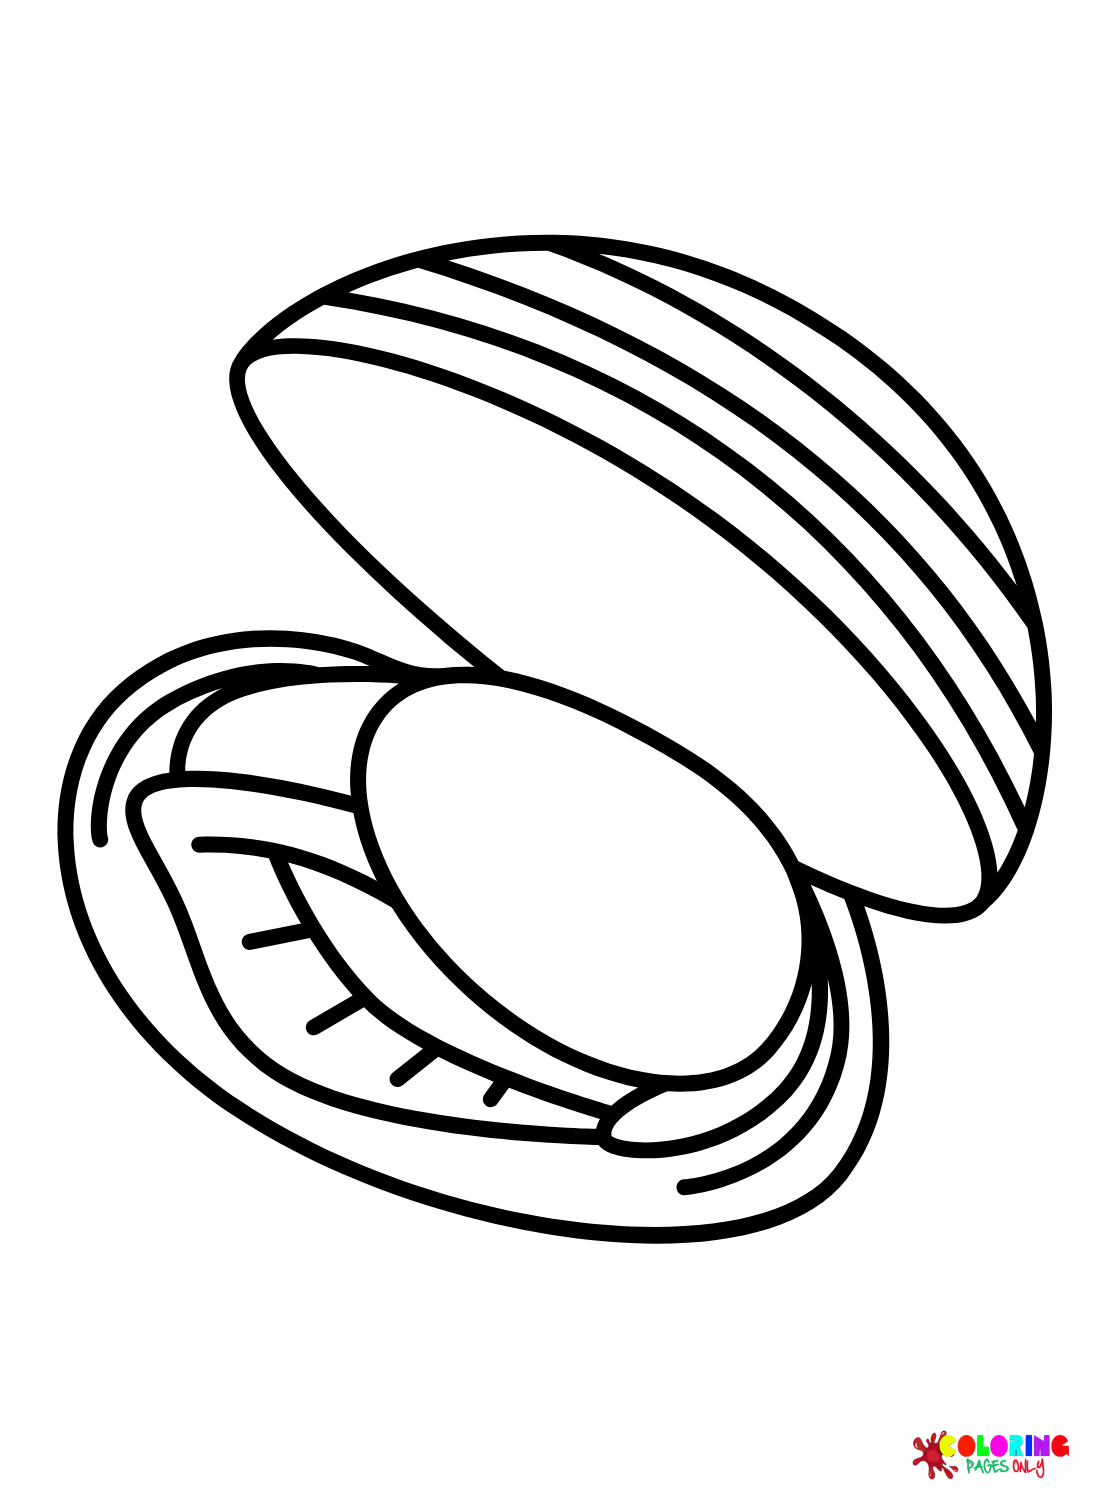 Mussels Seafood Coloring Page